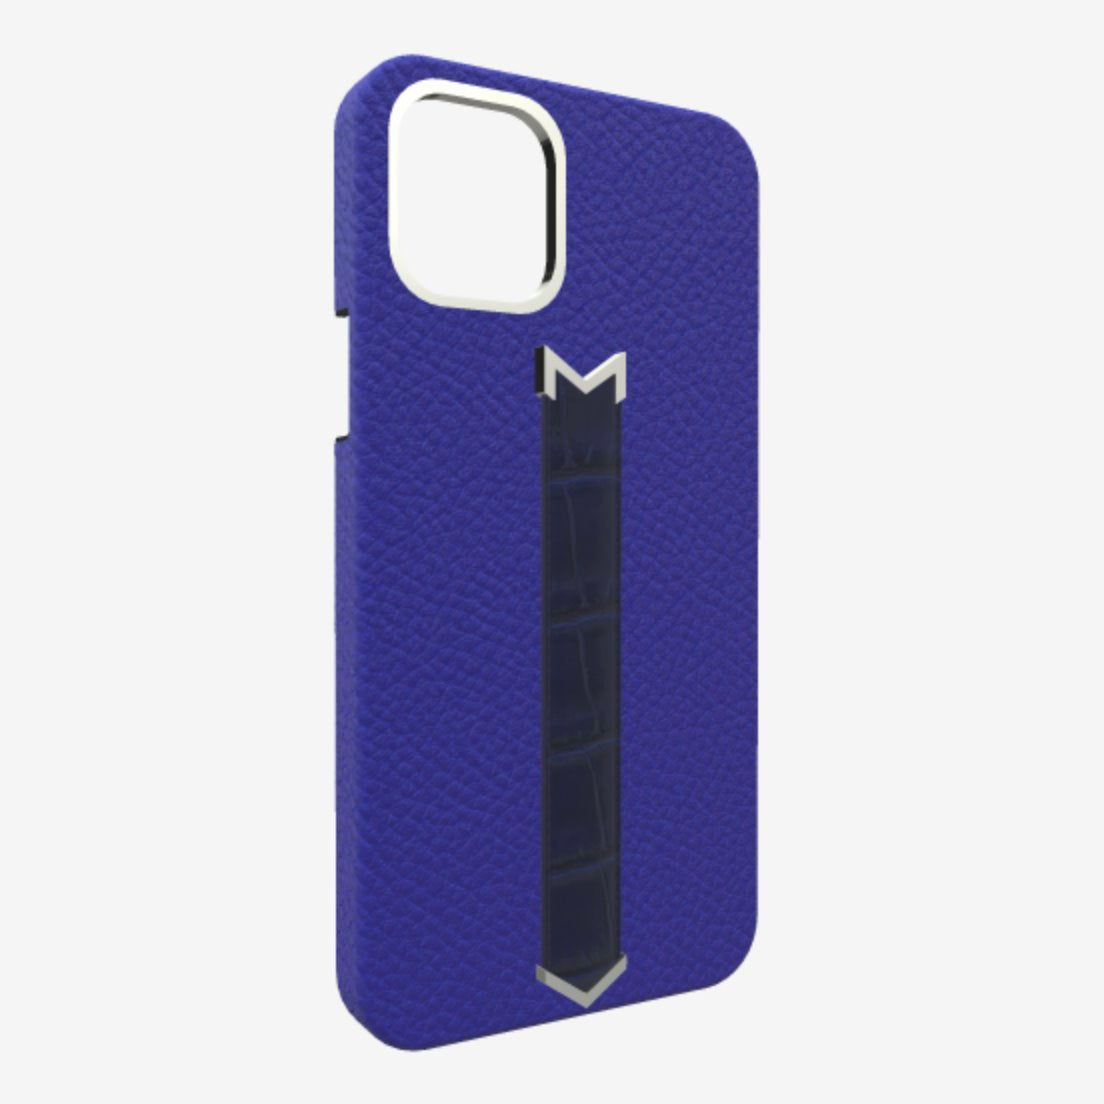 Silver Finger Strap Case for iPhone 13 Pro Max in Genuine Calfskin and Alligator Electric-Blue Navy-Blue 